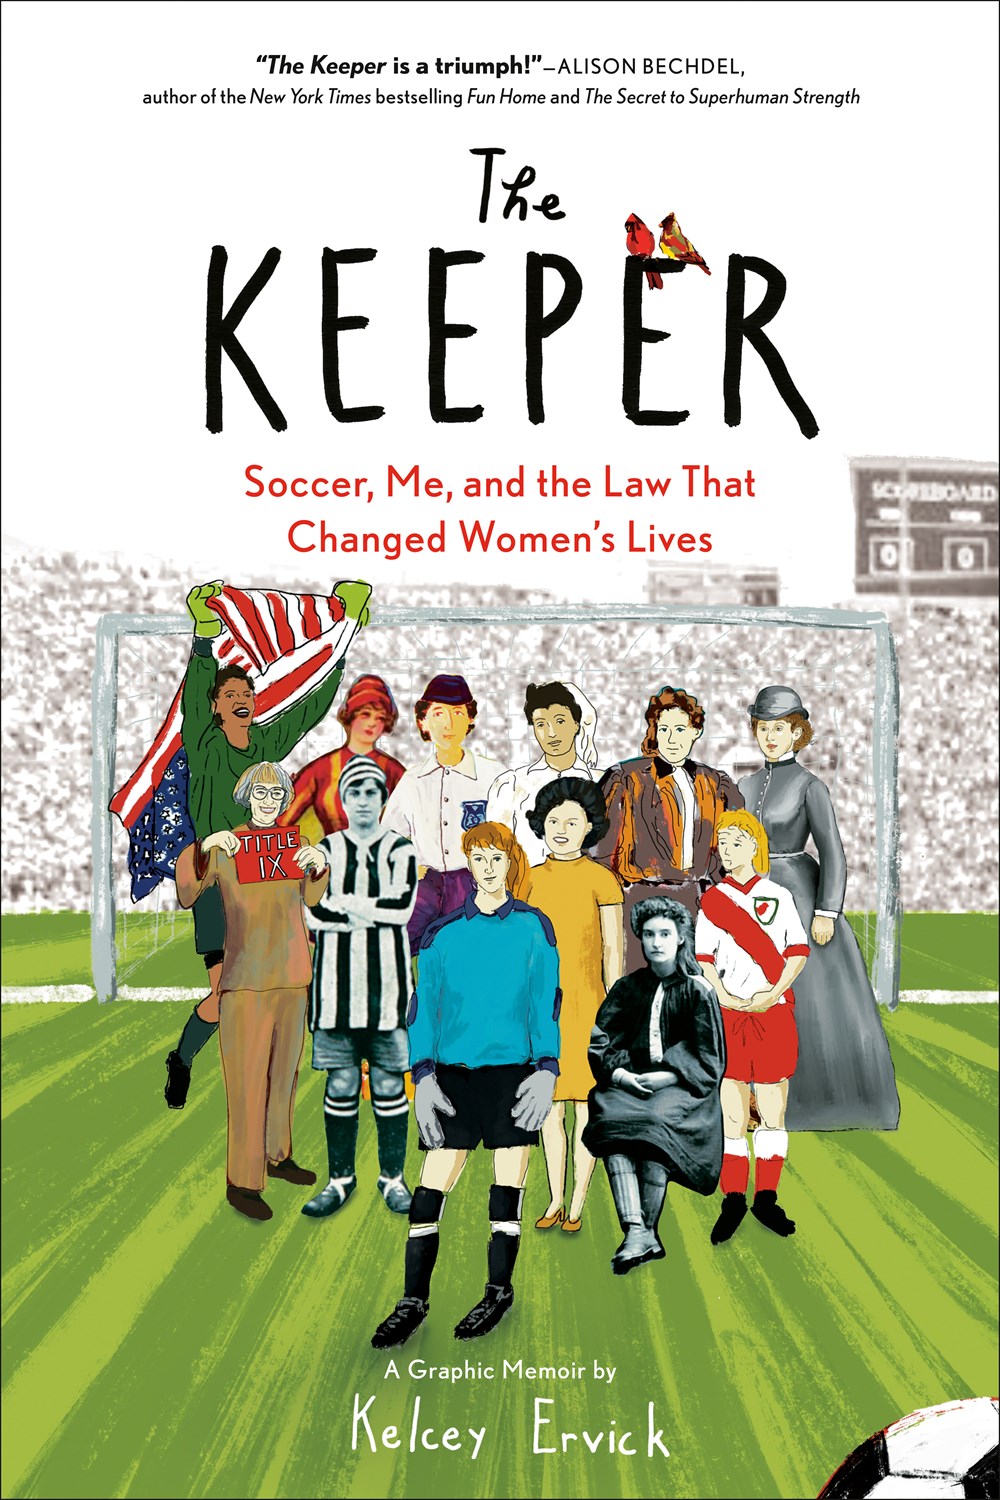 The Keeper: Soccer, Me, and the Law That Changed Women’s Lives